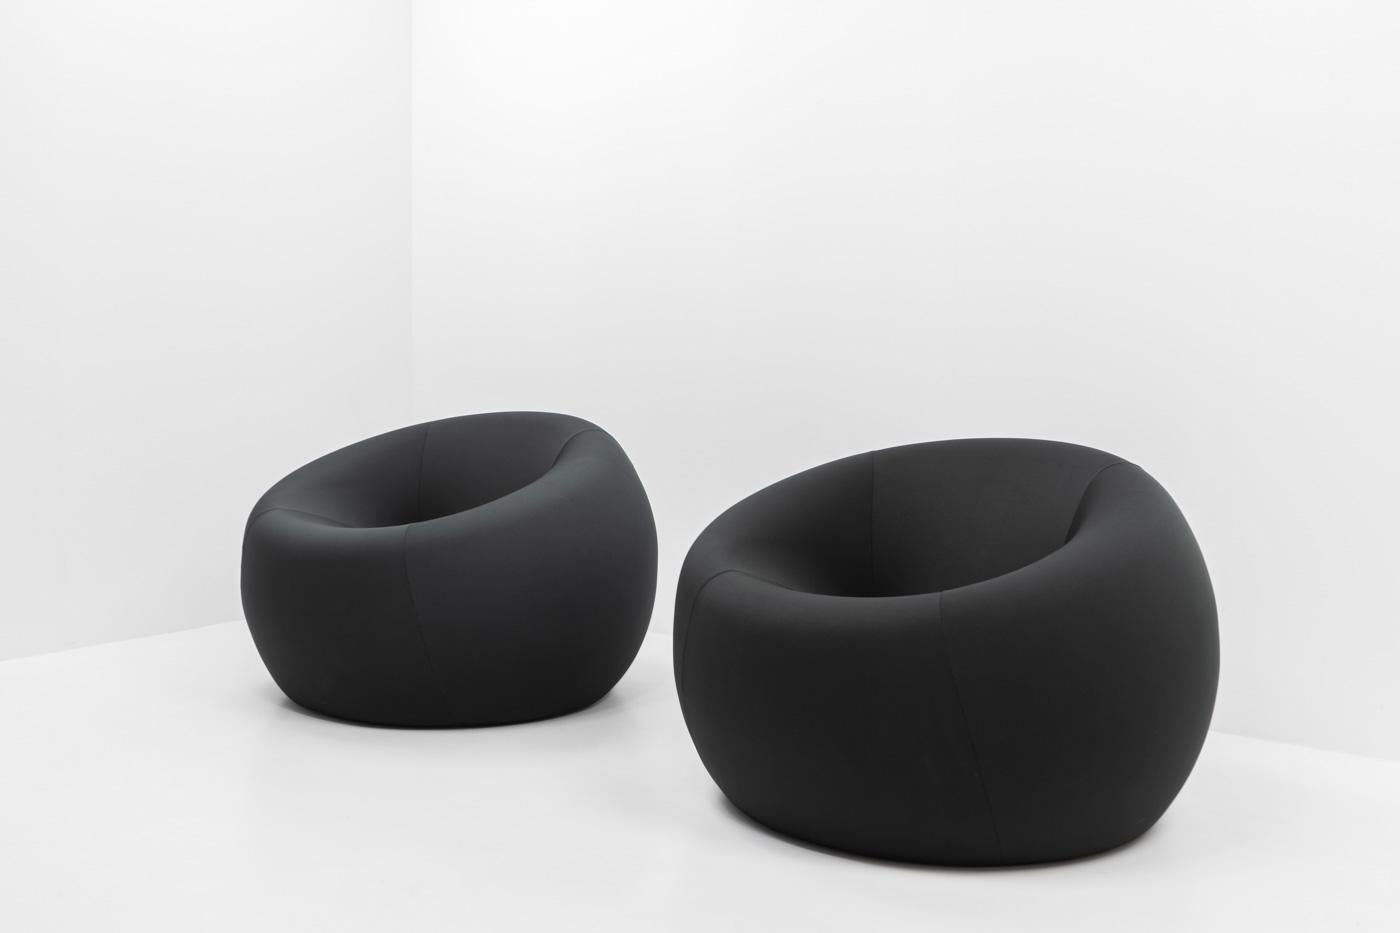 Italian UP1 Lounge Chairs by Gaetano Pesce for B&B Italia, 2000s For Sale